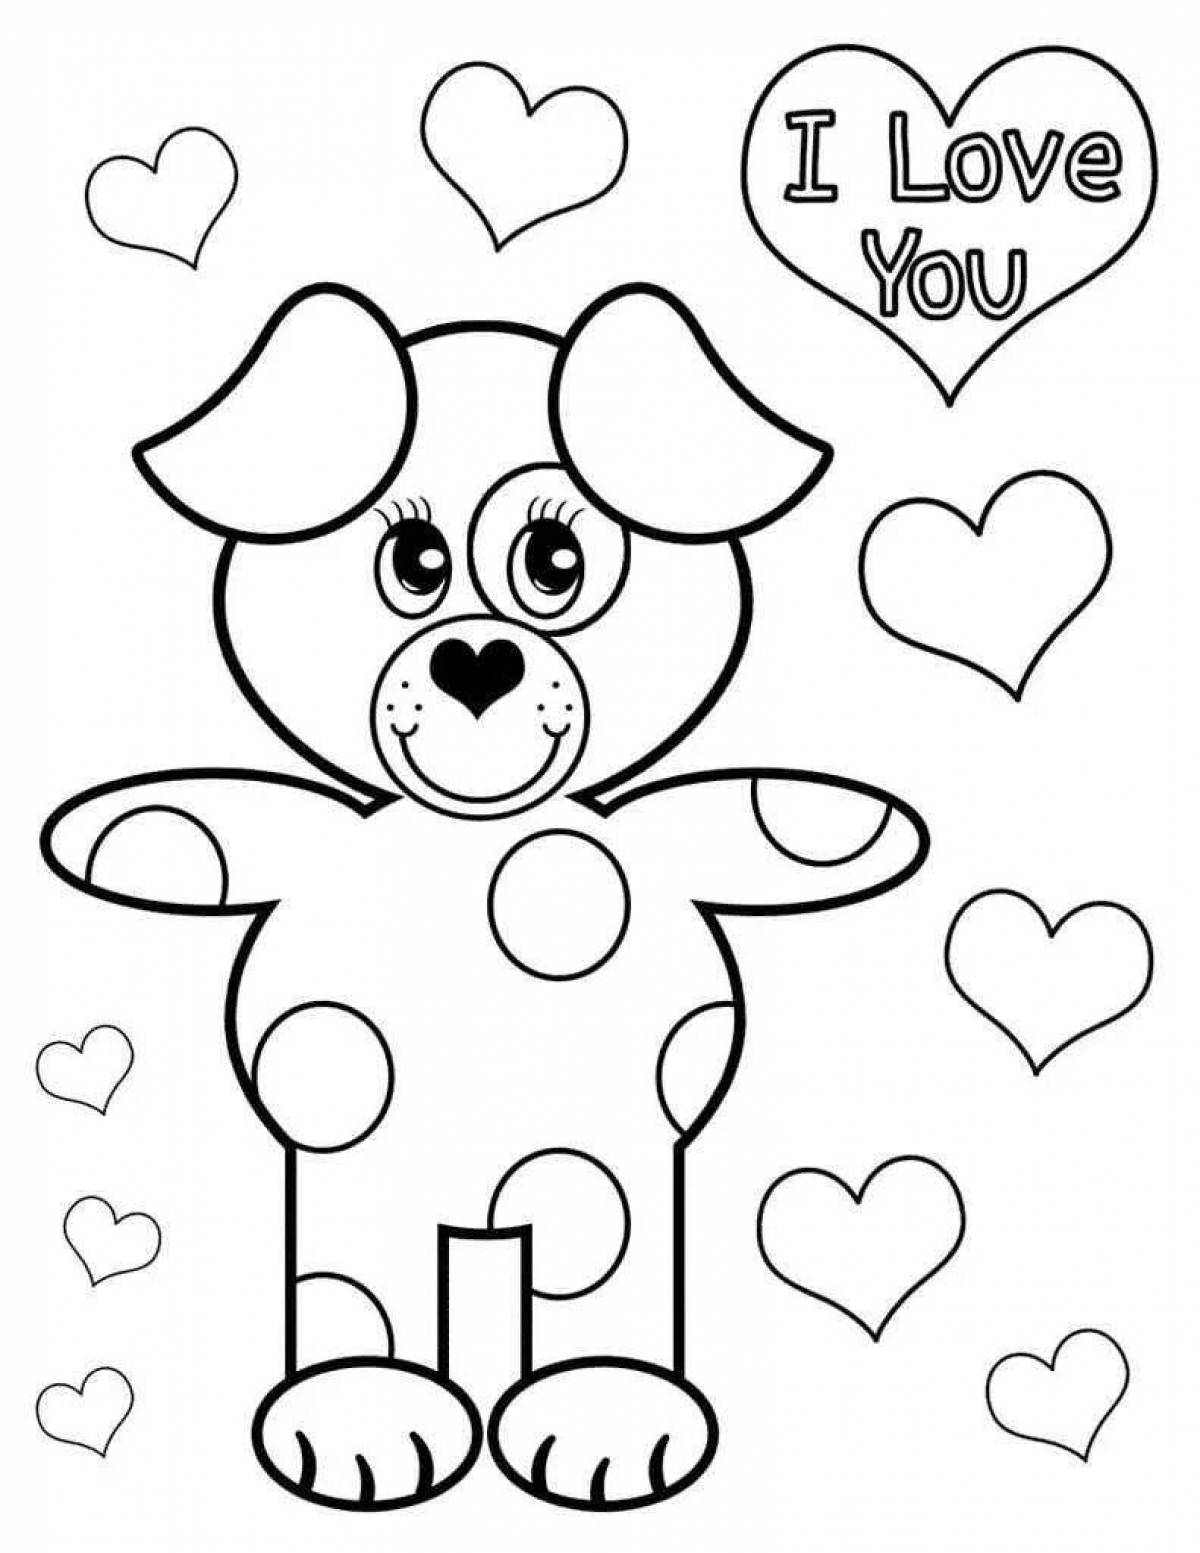 Lovely coloring book for valentine's day